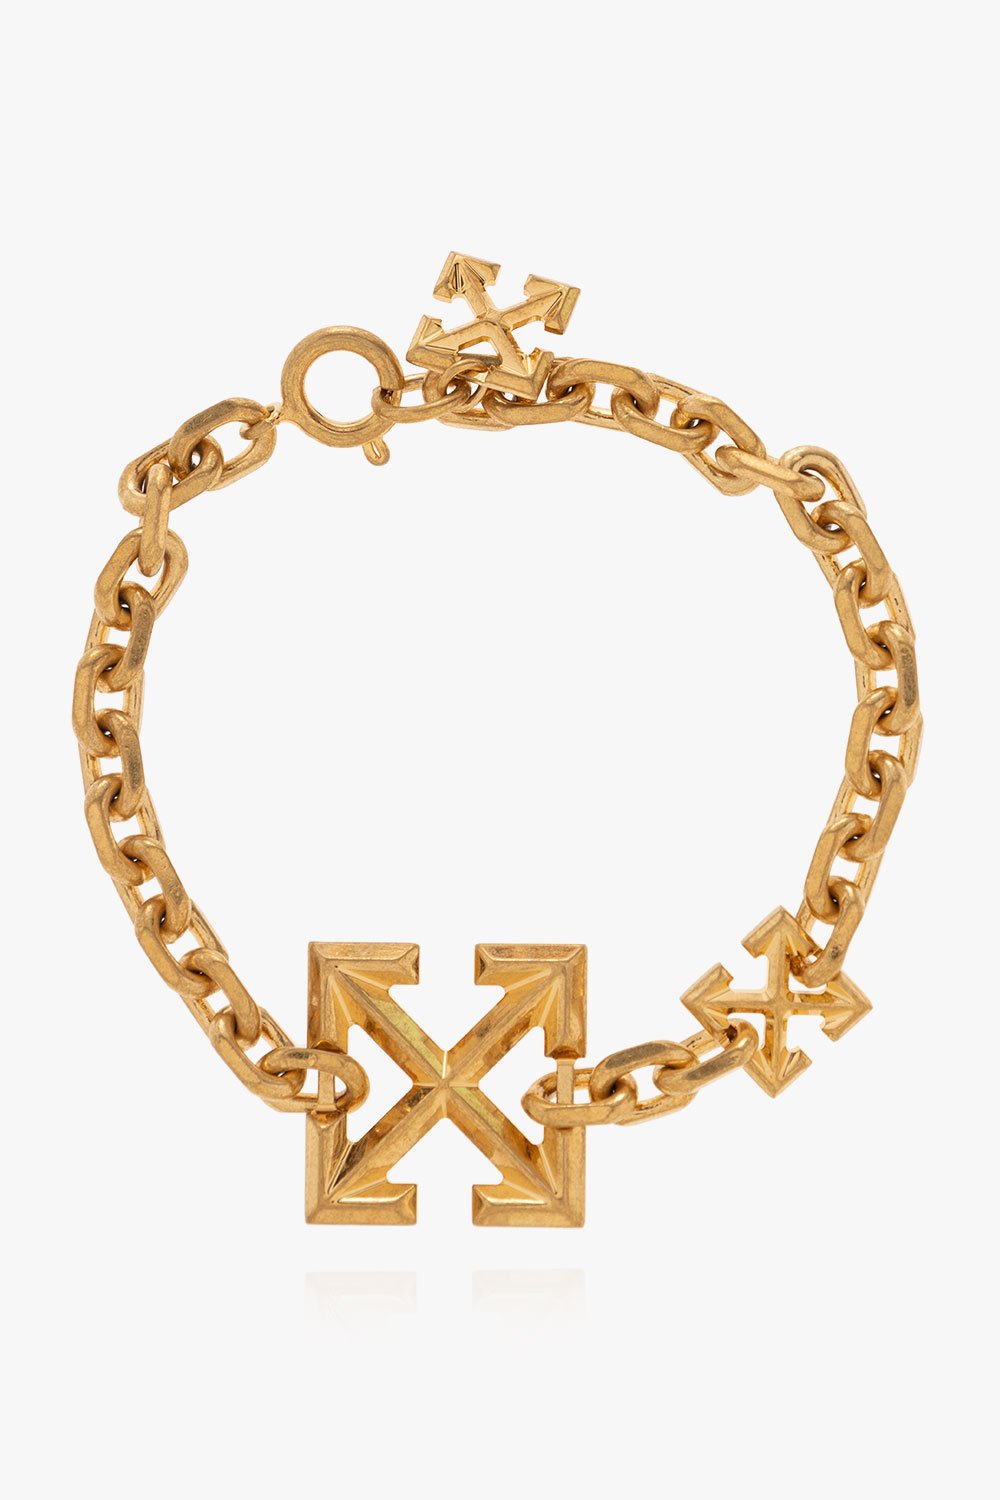 Off-White Arrows Motif Charms Chained Bracelet